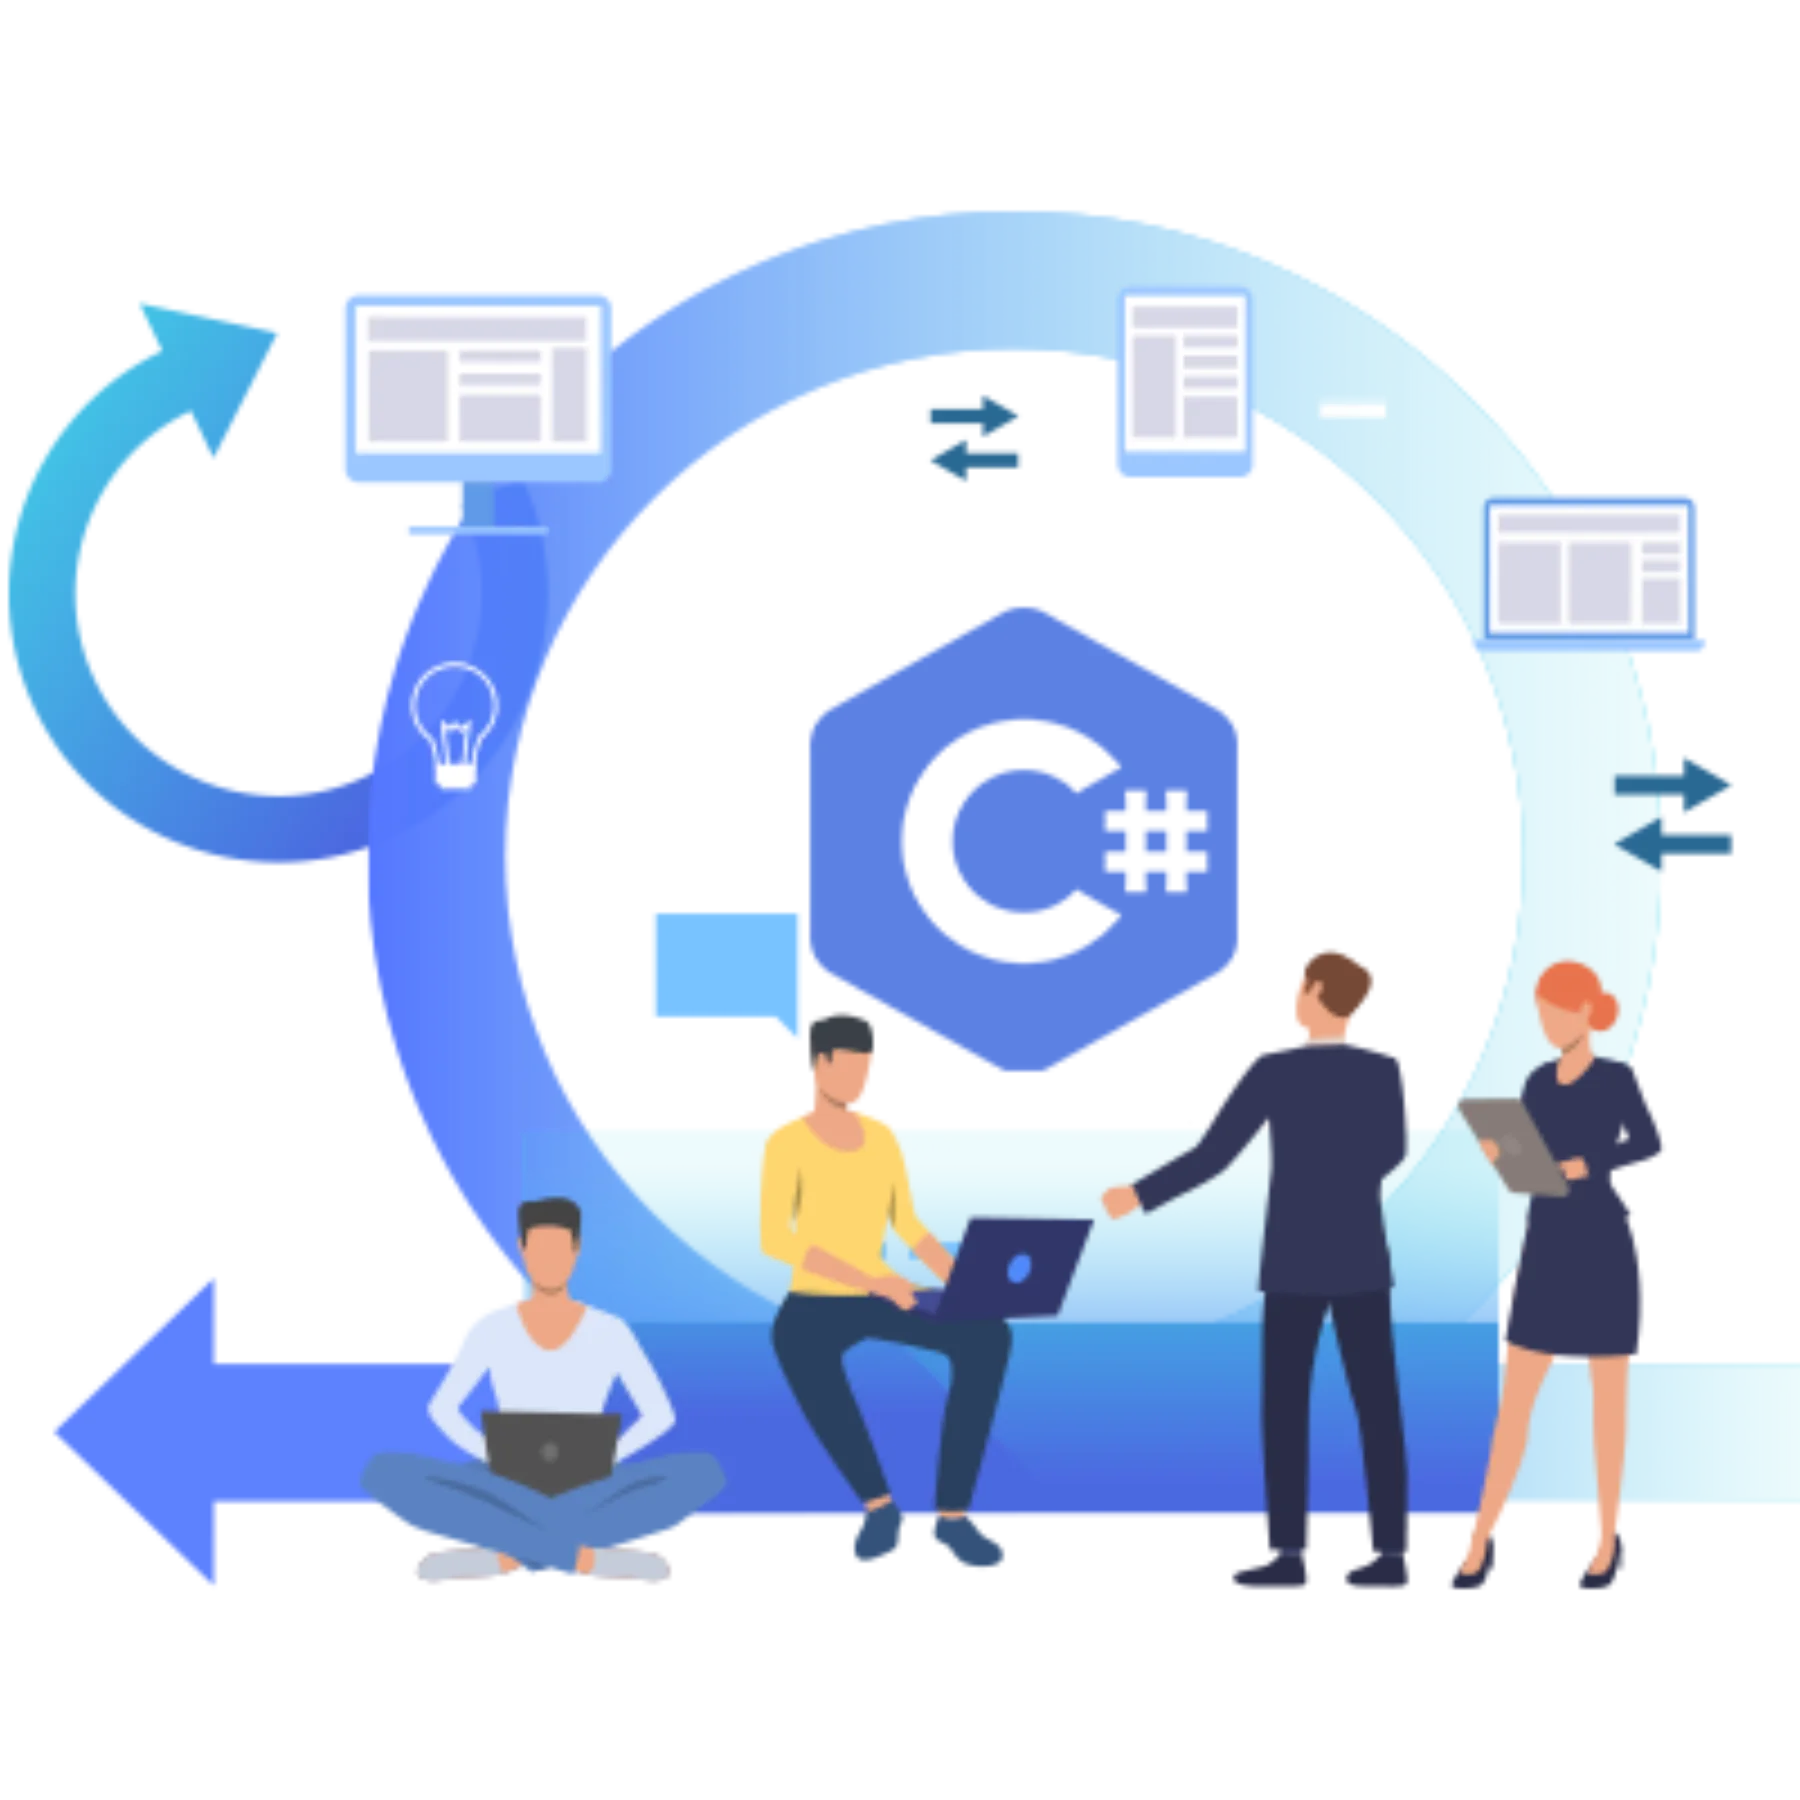 Empower your projects with expert C# Development Services from our renowned C# development company, delivering tailored solutions for your business needs.